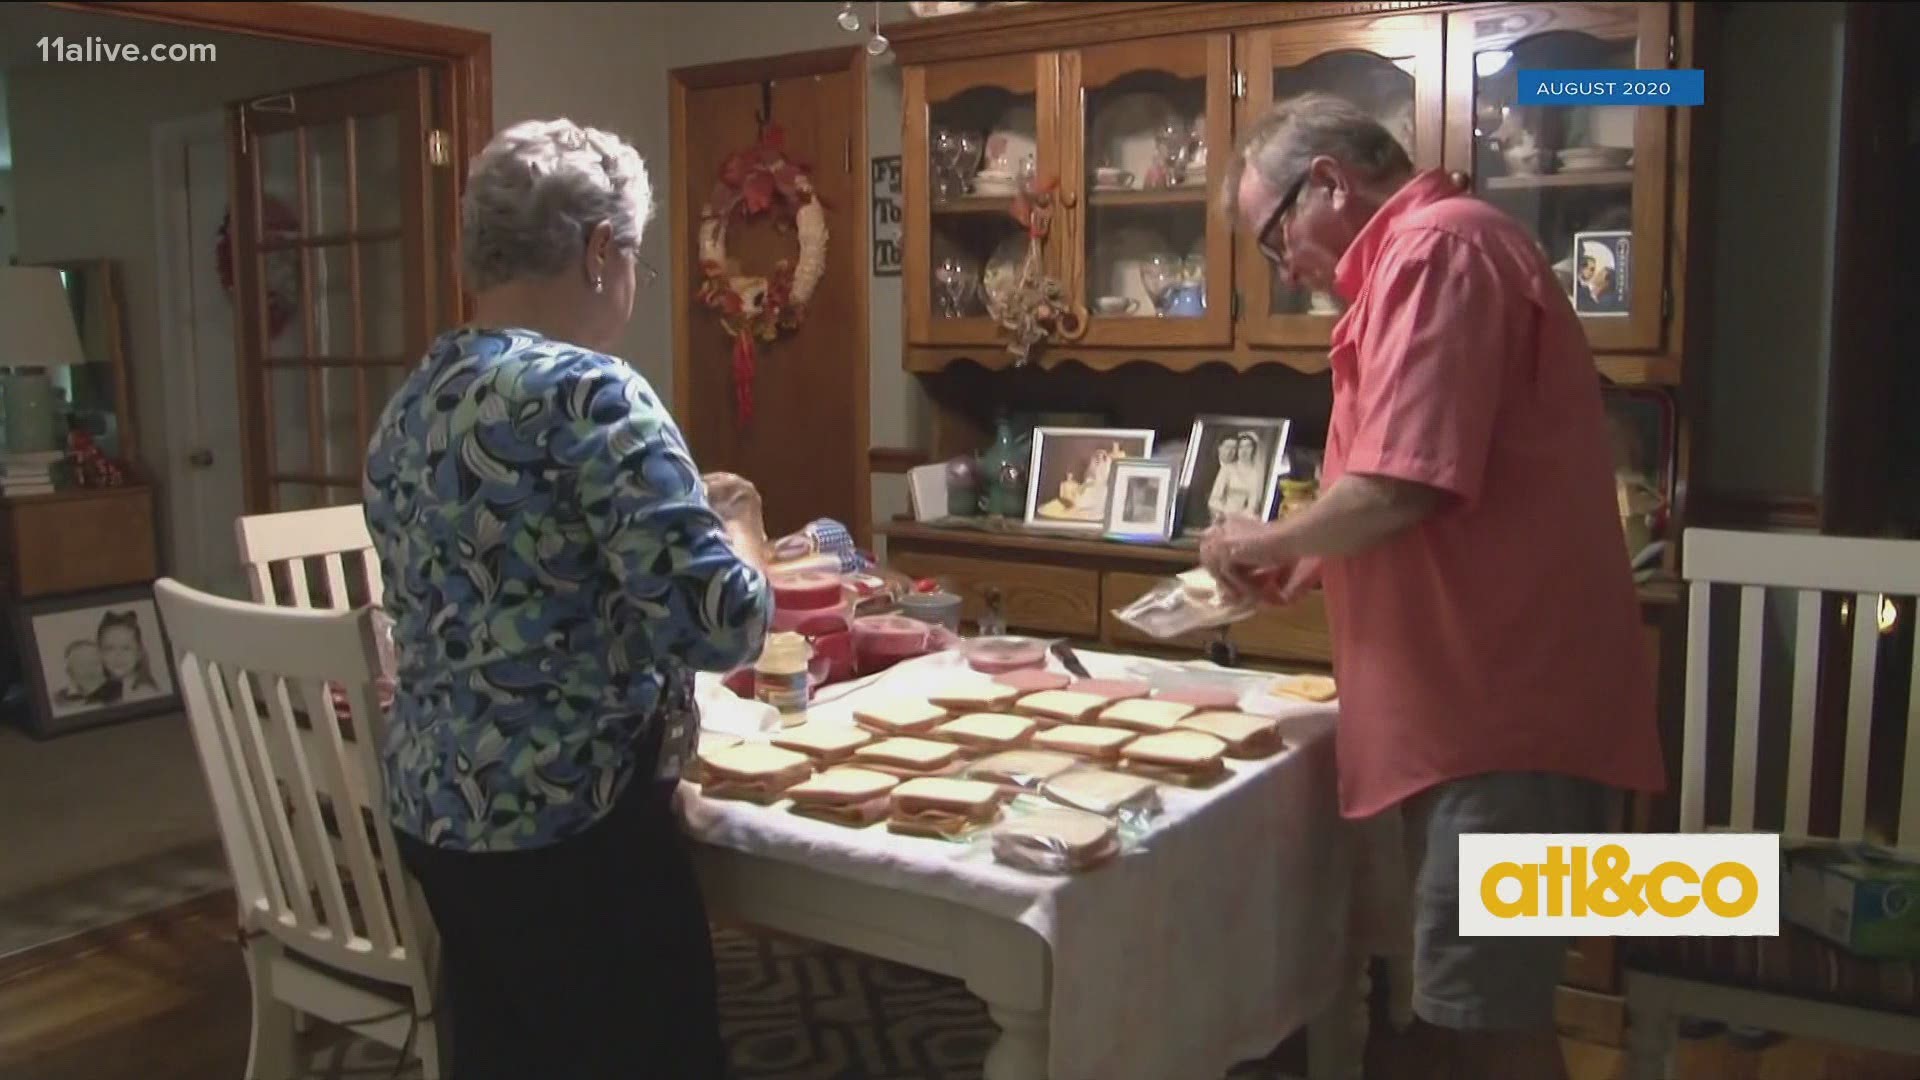 "Love, Jenny." Mary Ann & John Bush pack lunches for the homeless, in memory of their beloved daughter who battled mental health issues and addiction while homeless.